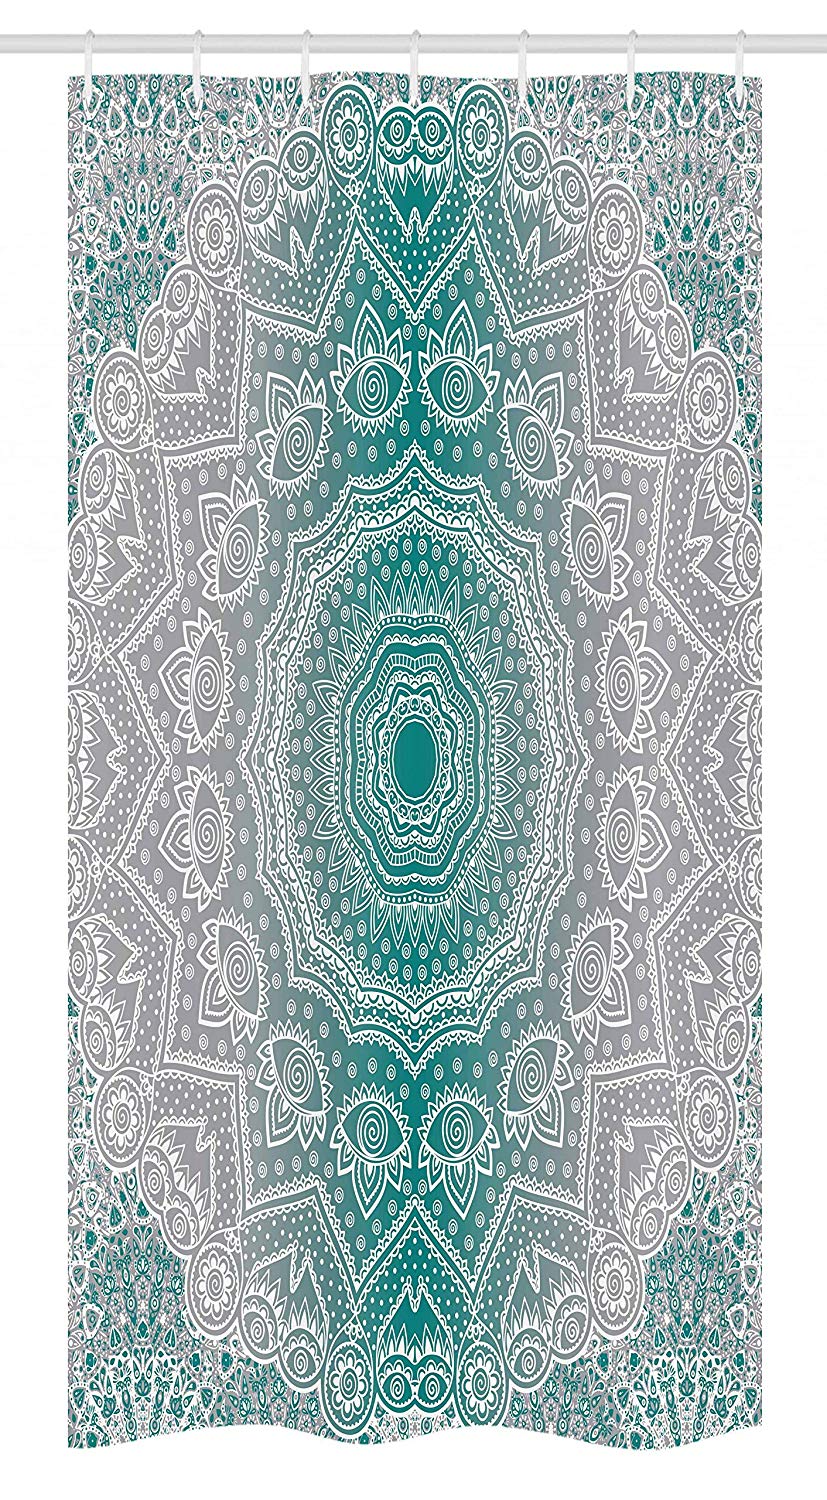 Ambesonne Grey and Teal Stall Shower Curtain, Mandala Ombre Geometry Occult Pattern with Flower Lines Display Artwork, Fabric Bathroom Decor Set with Hooks, 36